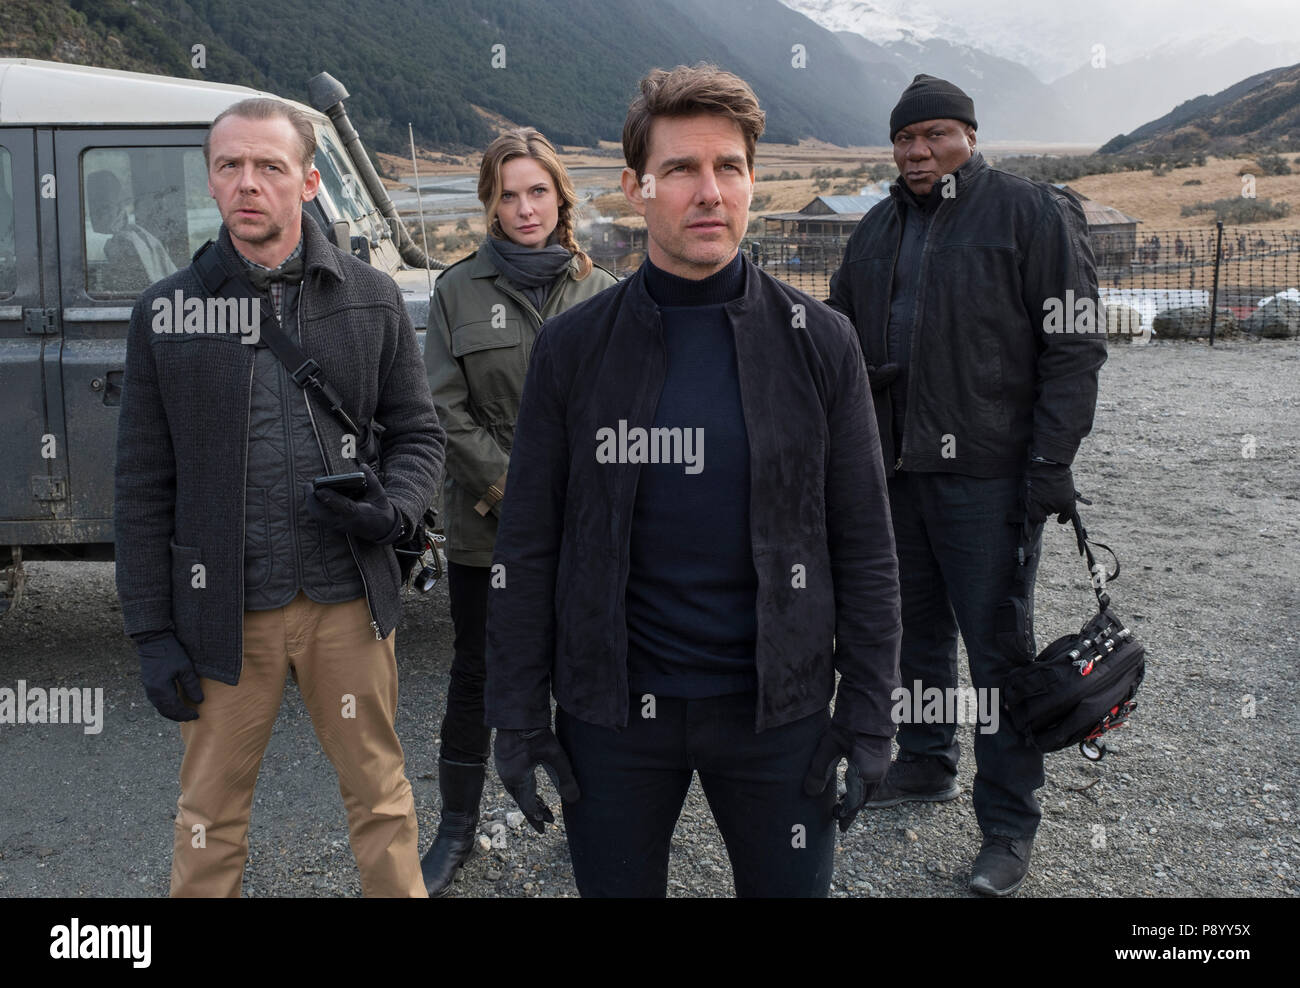 RELEASE DATE: July 27, 2018 TITLE: Mission: Impossible - Fallout STUDIO: Paramount Pictures DIRECTOR: Christopher McQuarrie PLOT: Ethan Hunt and his IMF team, along with some familiar allies, race against time after a mission gone wrong. STARRING: SIMON PEGG as Benji Dunn, REBECCA FERGUSON as Ilsa Faust, TOM CRUISE as Ethan Hunt and VING RHAMES as Luther Stickell. (Credit Image: © Paramount Pictures/Entertainment Pictures) Stock Photo